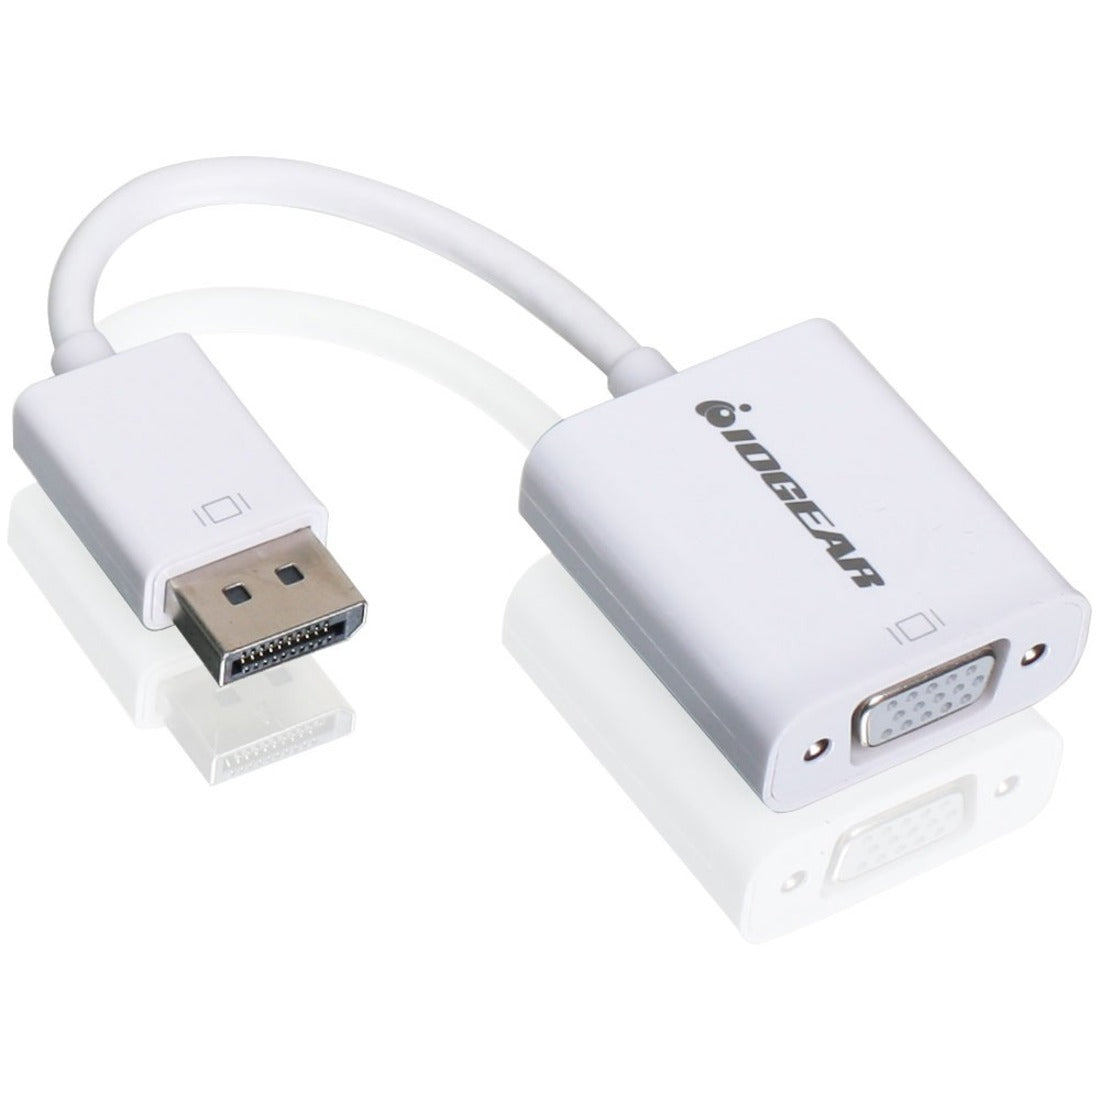 IOGEAR GDPVGAW6 DisplayPort to VGA Adapter Cable, Plug & Play, 1920 x 1200 Supported Resolution